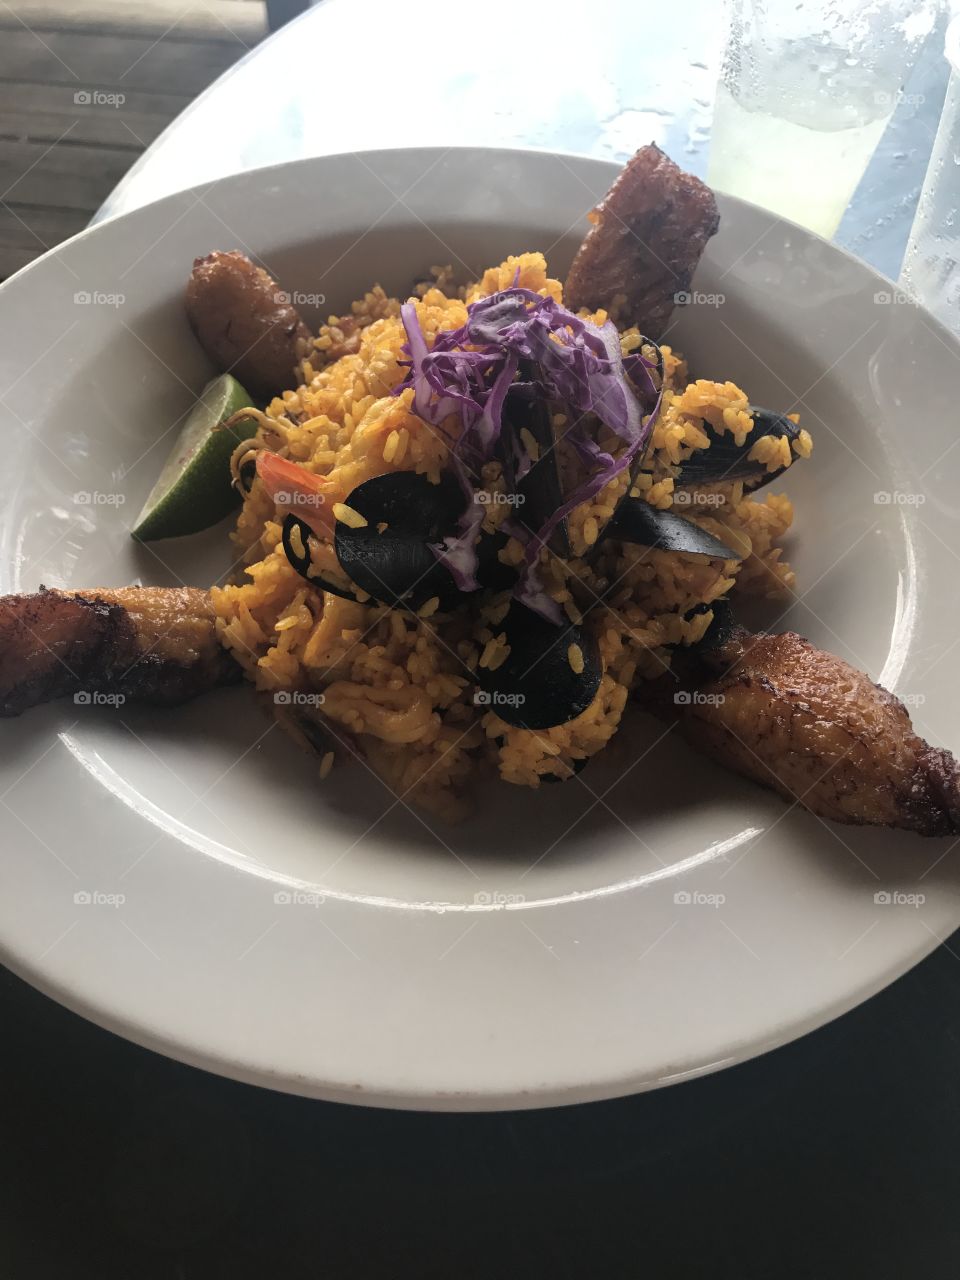 A fresh Puerto Rican dish of seafood in rice with fried plantains